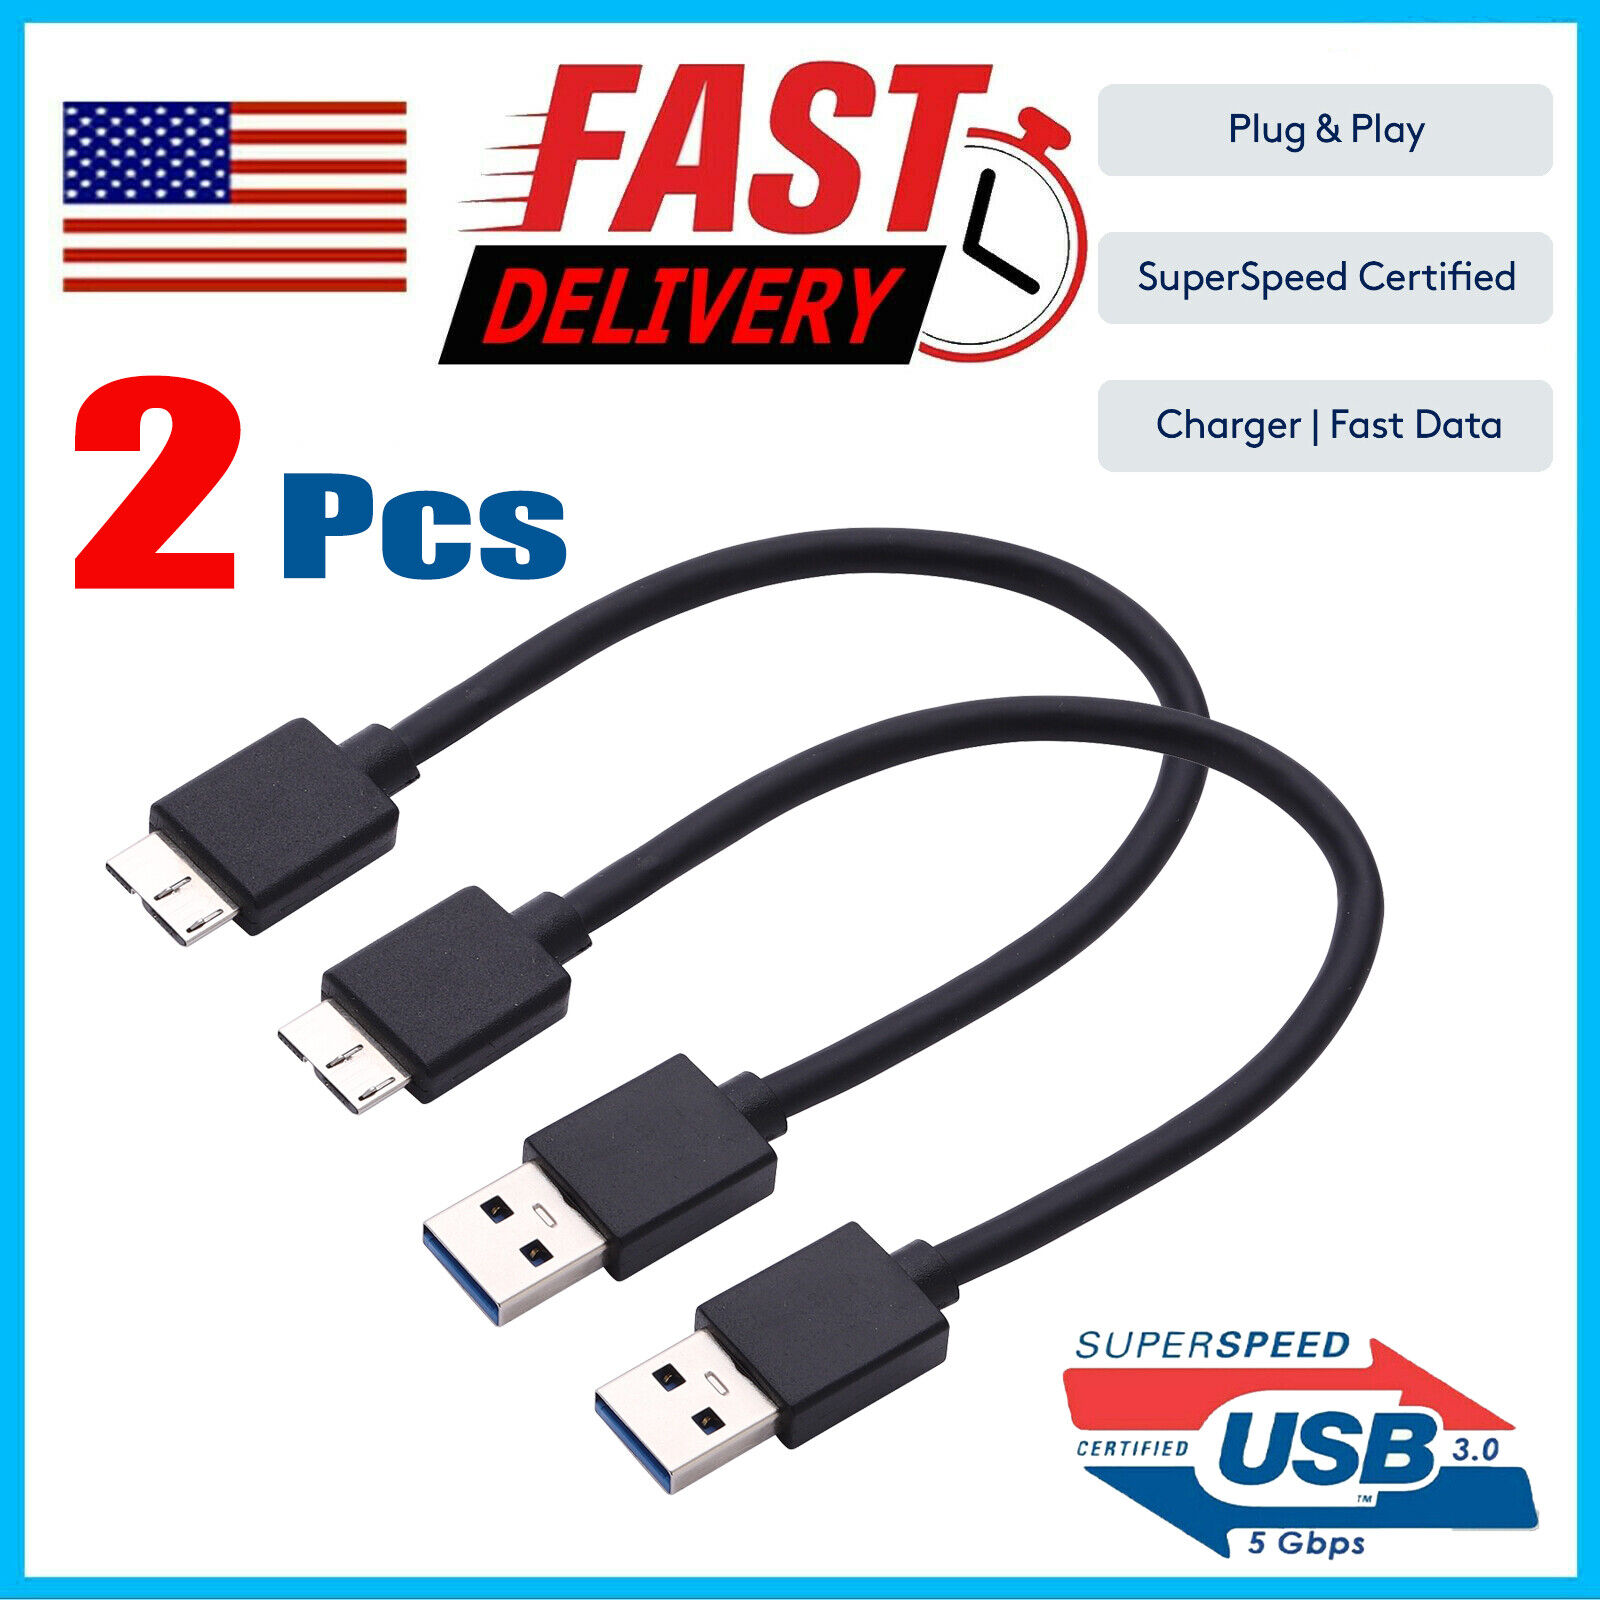 2 Pcs Micro USB 3.0 Flat Cable for WD My Passport & My Book External Hard Drive 